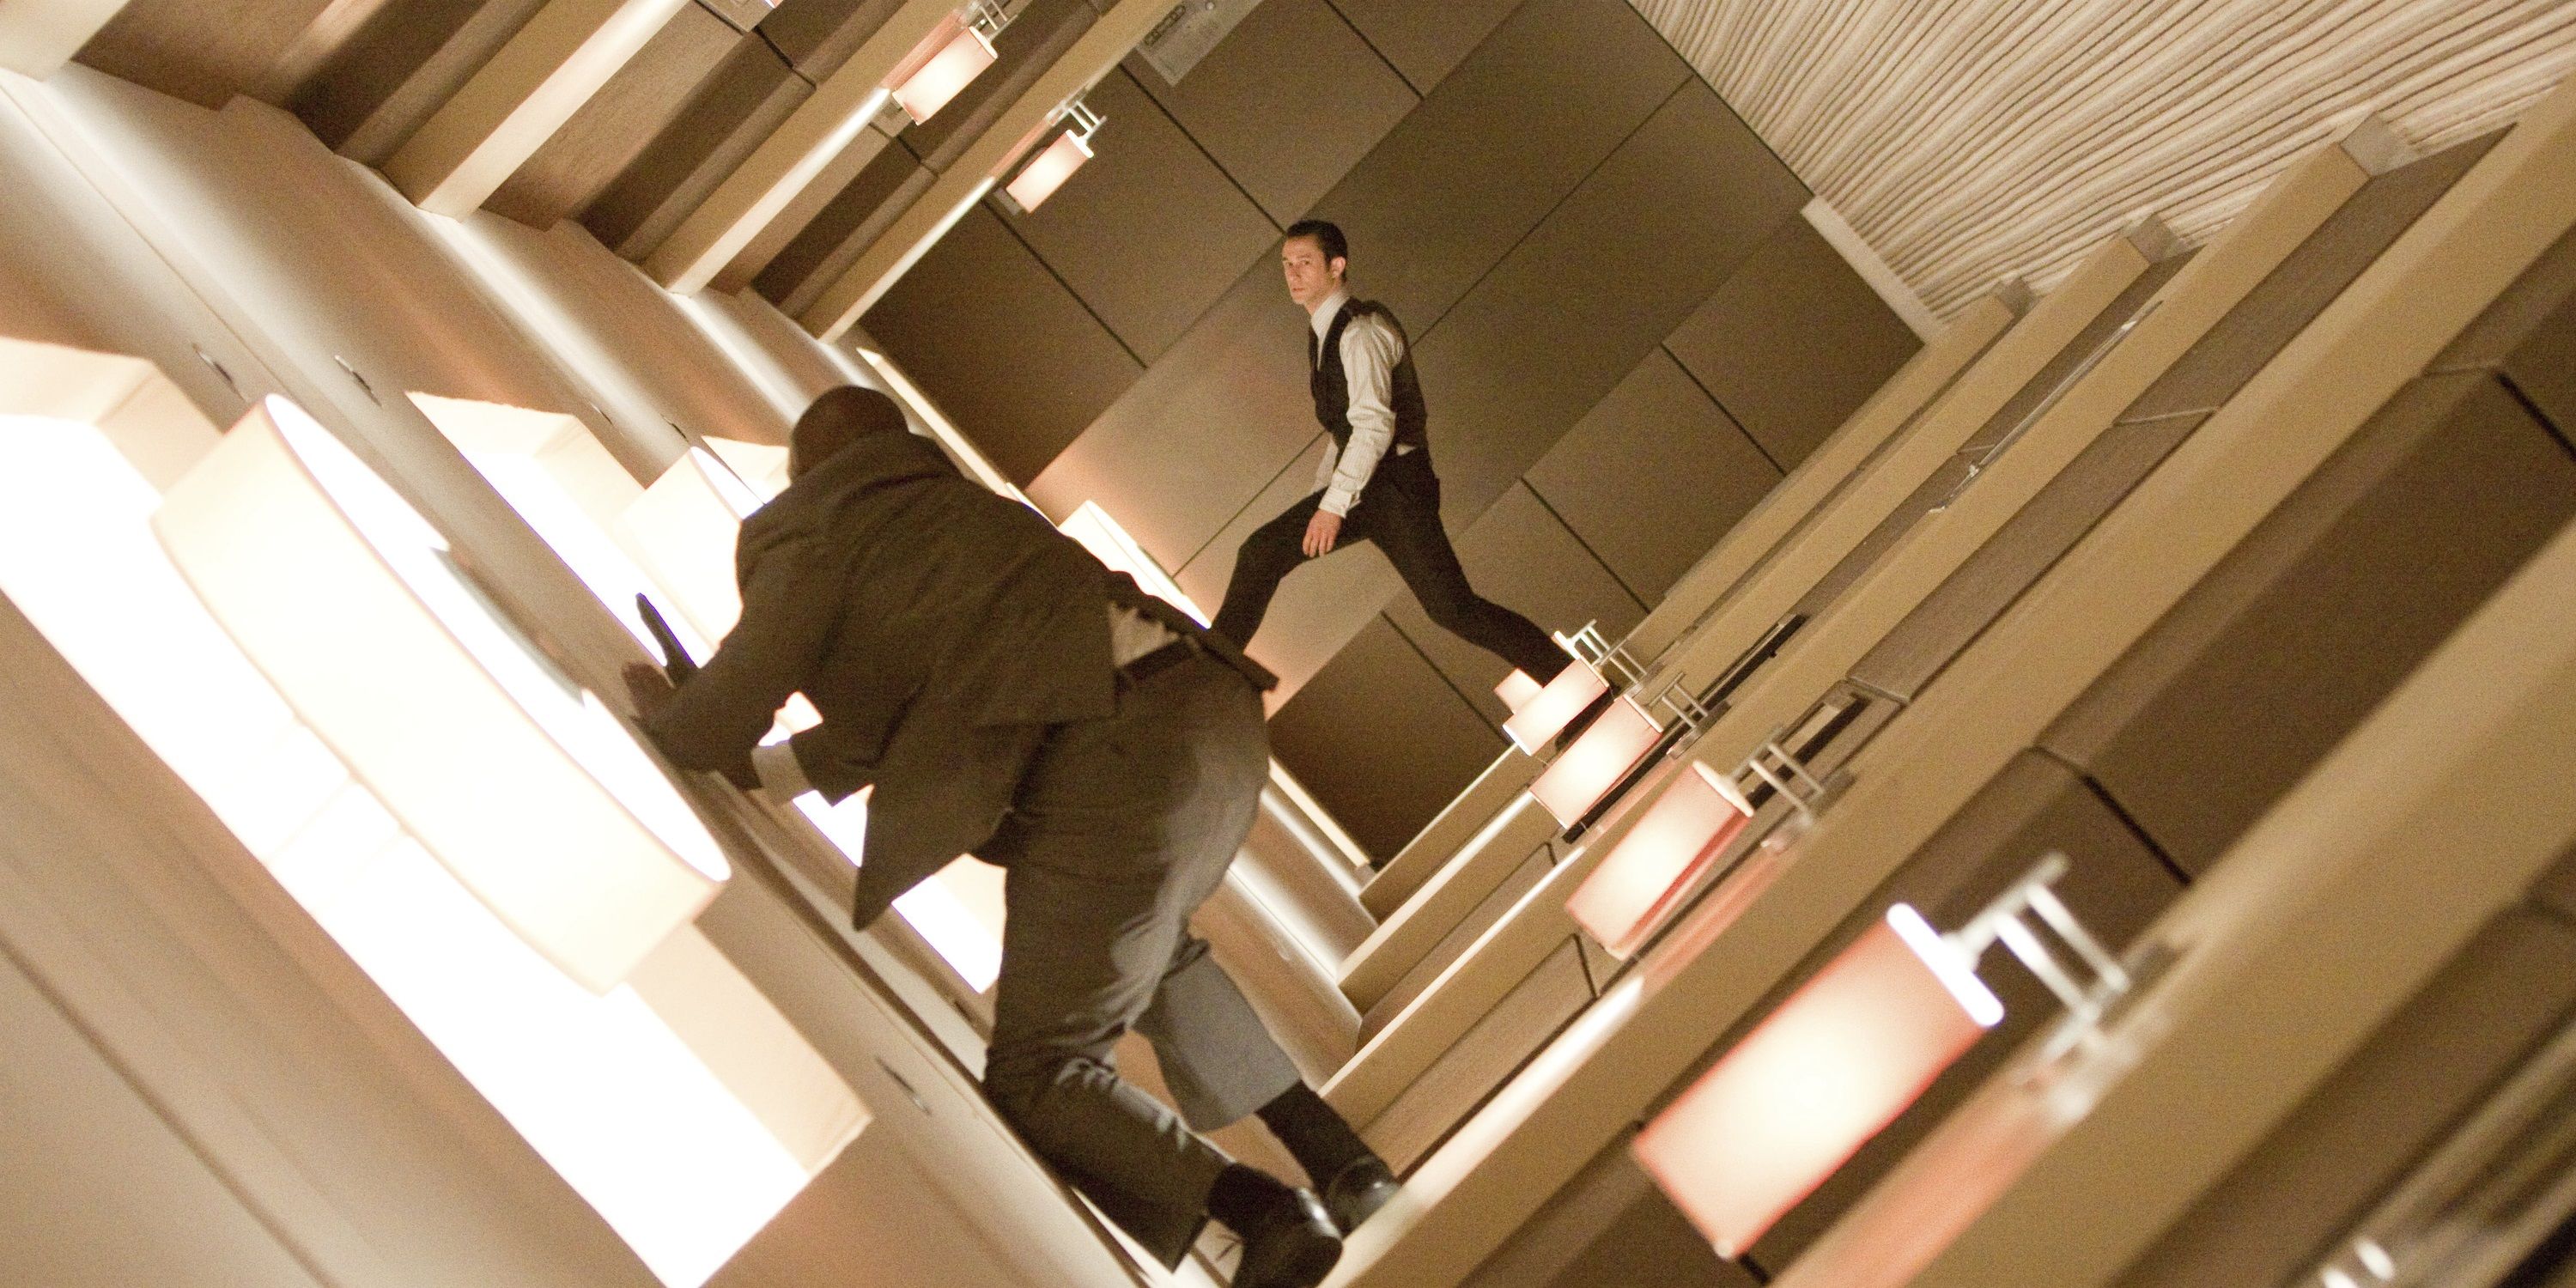 The hallway fight scene in Inception